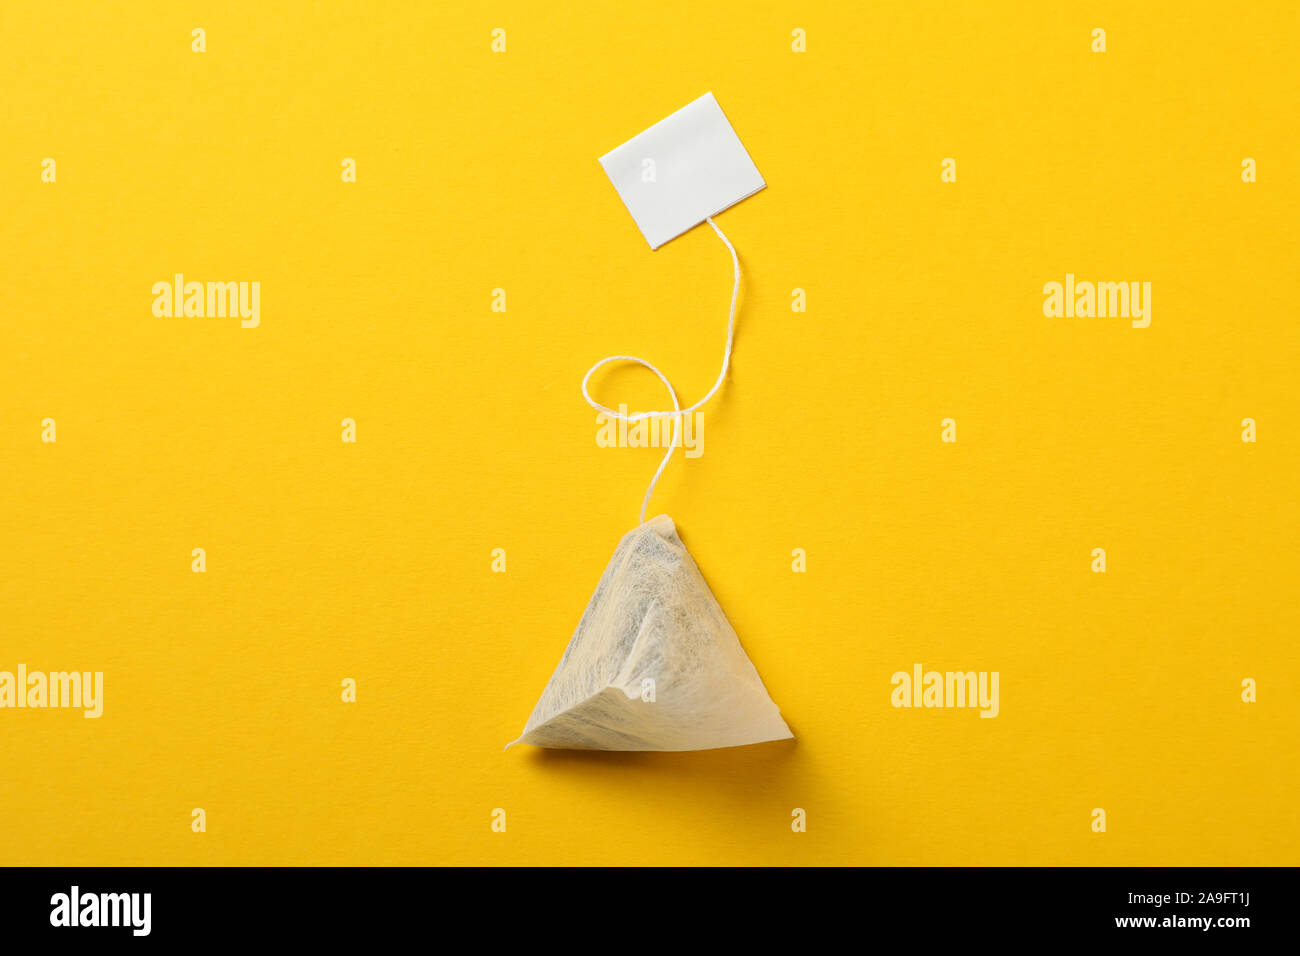 Download Pyramid Tea Bag High Resolution Stock Photography And Images Alamy Yellowimages Mockups